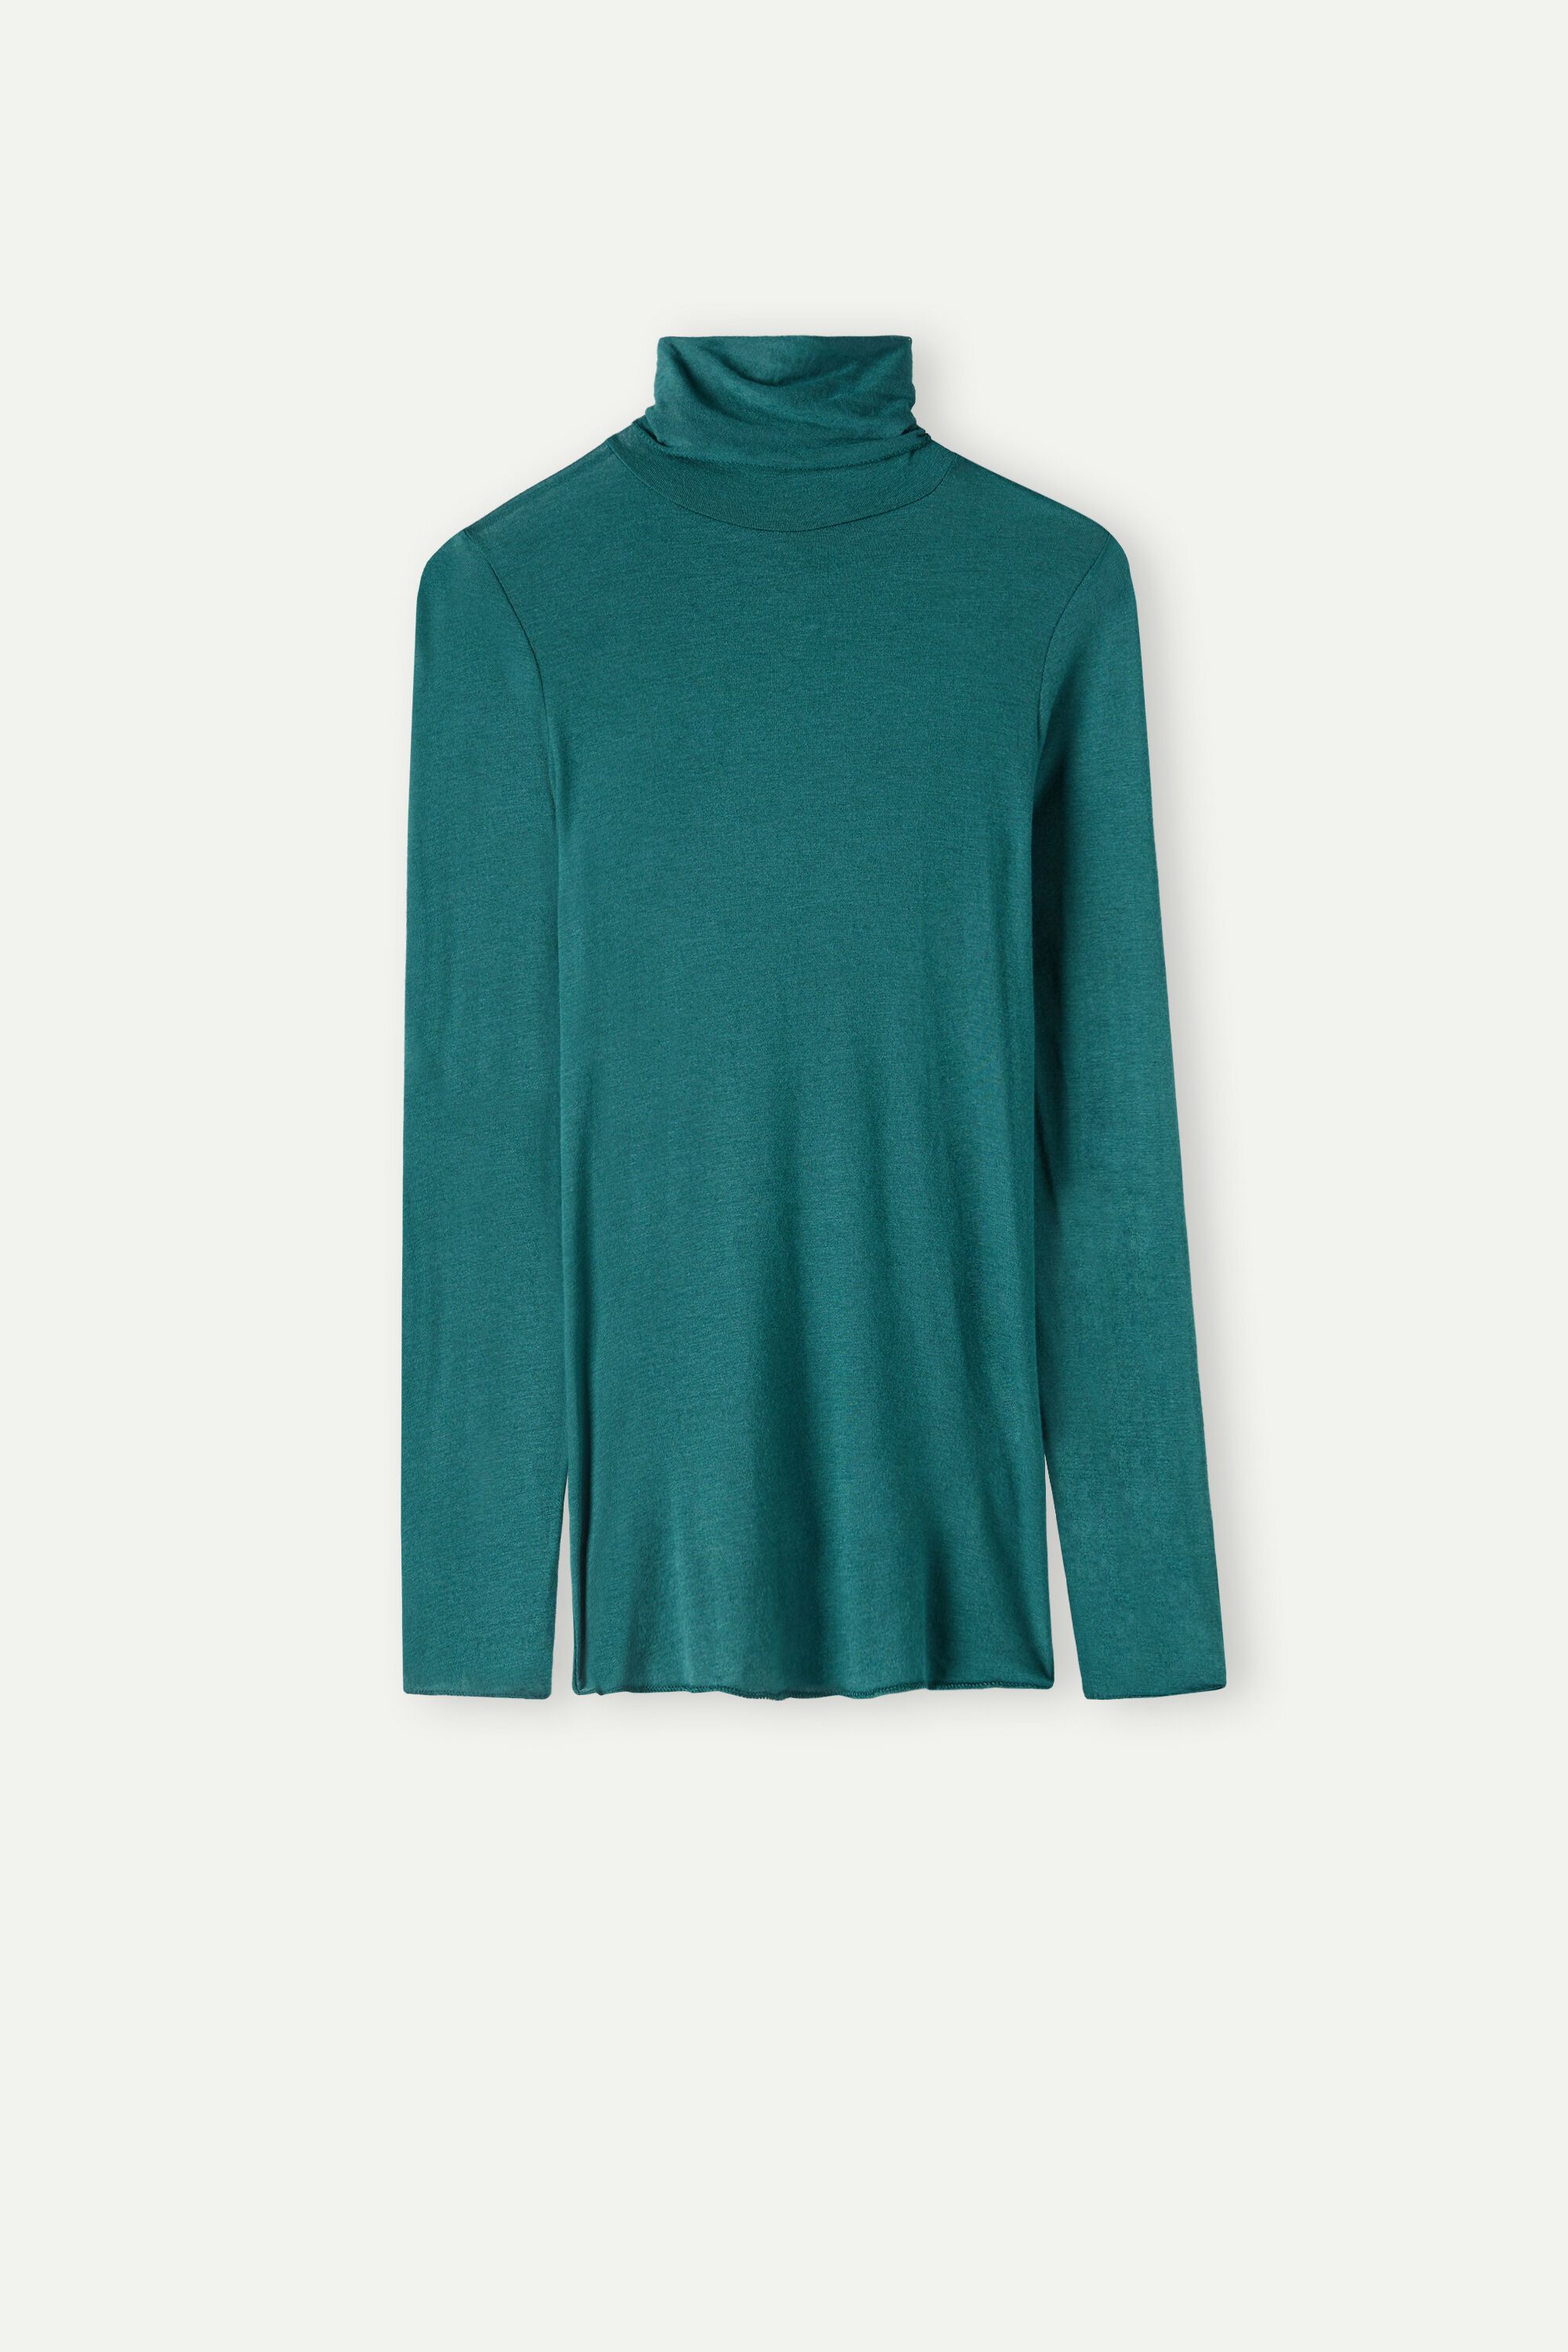 Modal Cashmere Ultralight High-Neck Top | Intimissimi (US)